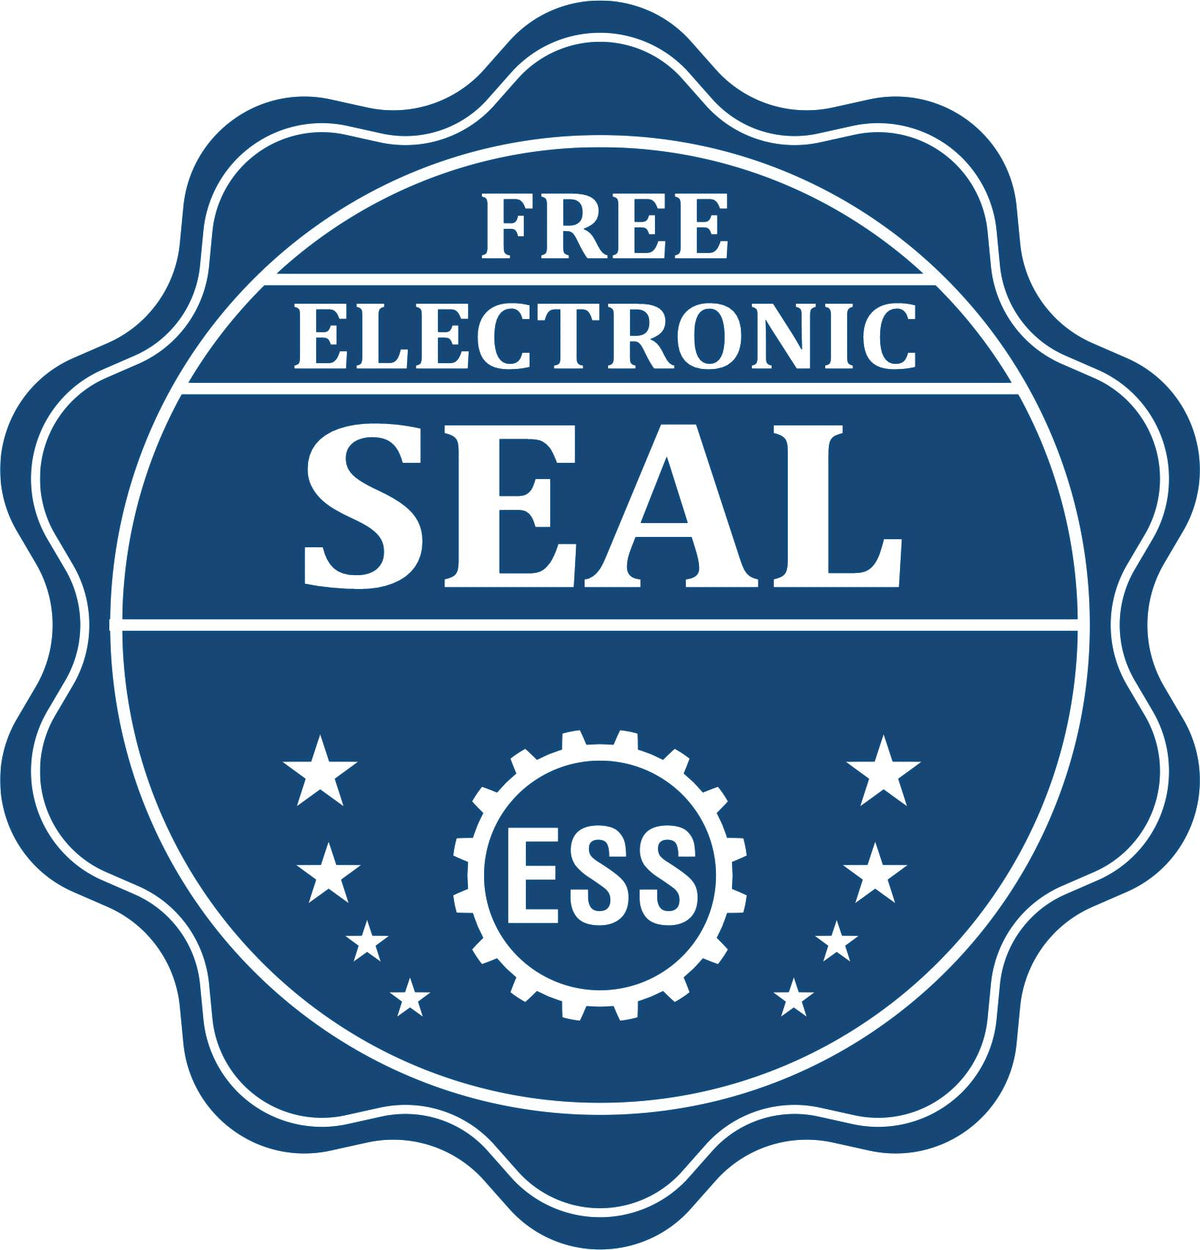 A badge showing a free electronic seal for the Heavy Duty Cast Iron Nebraska Architect Embosser with stars and the ESS gear on the emblem.